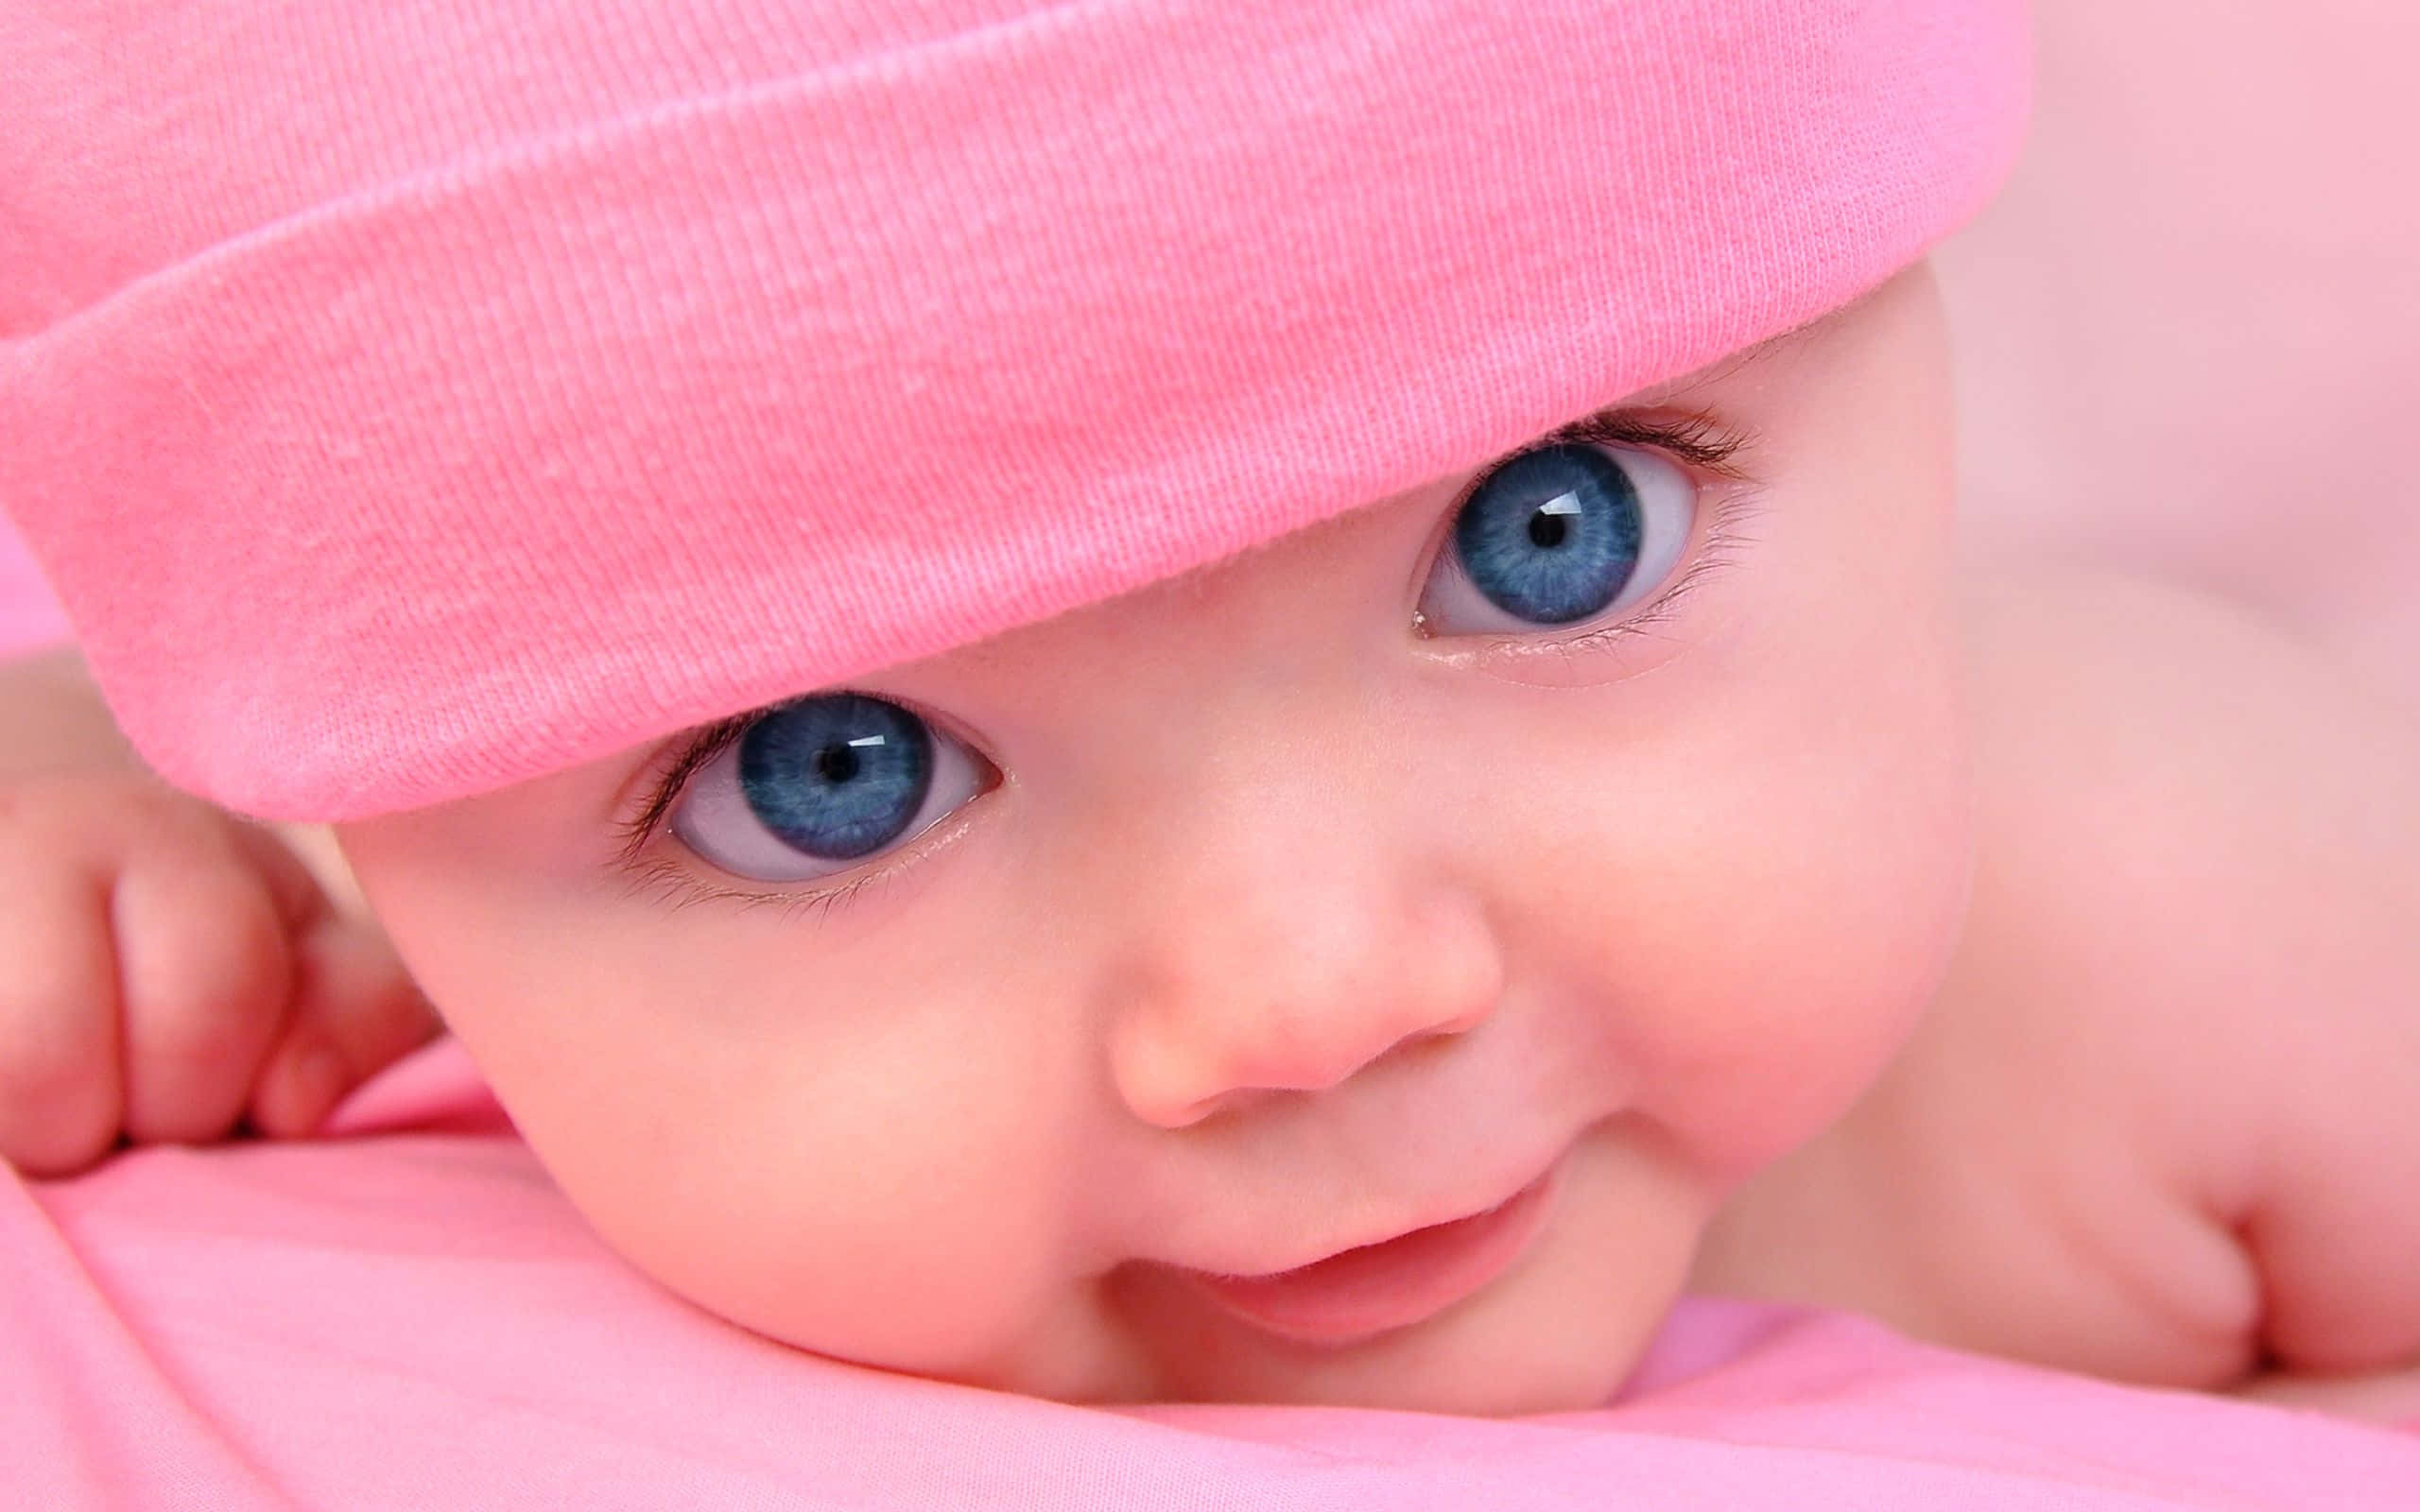 Adorable Baby Smiling With Closed Eyes